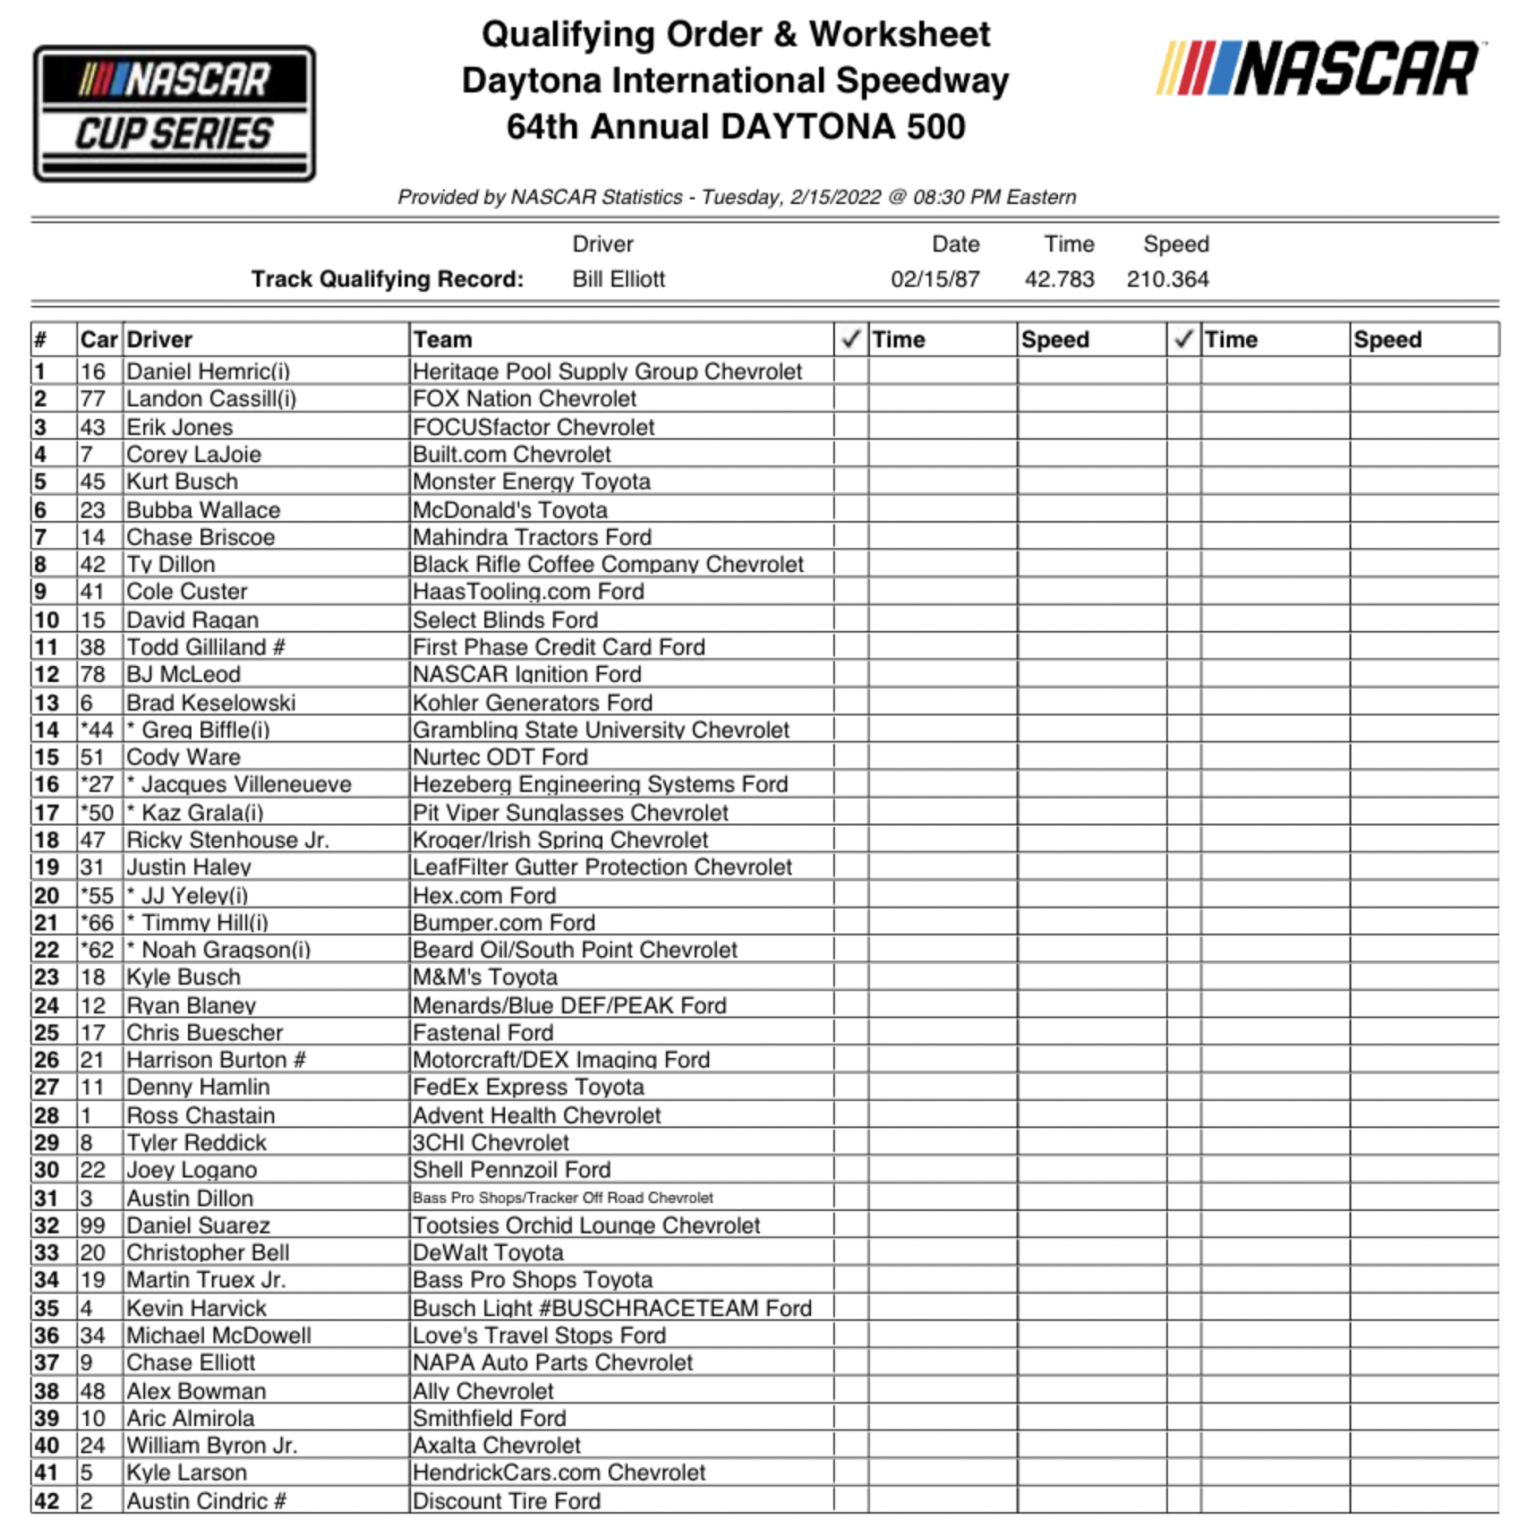 NCS Qualifying Order For The 64th Running of The Daytona 500 – Pit Stop